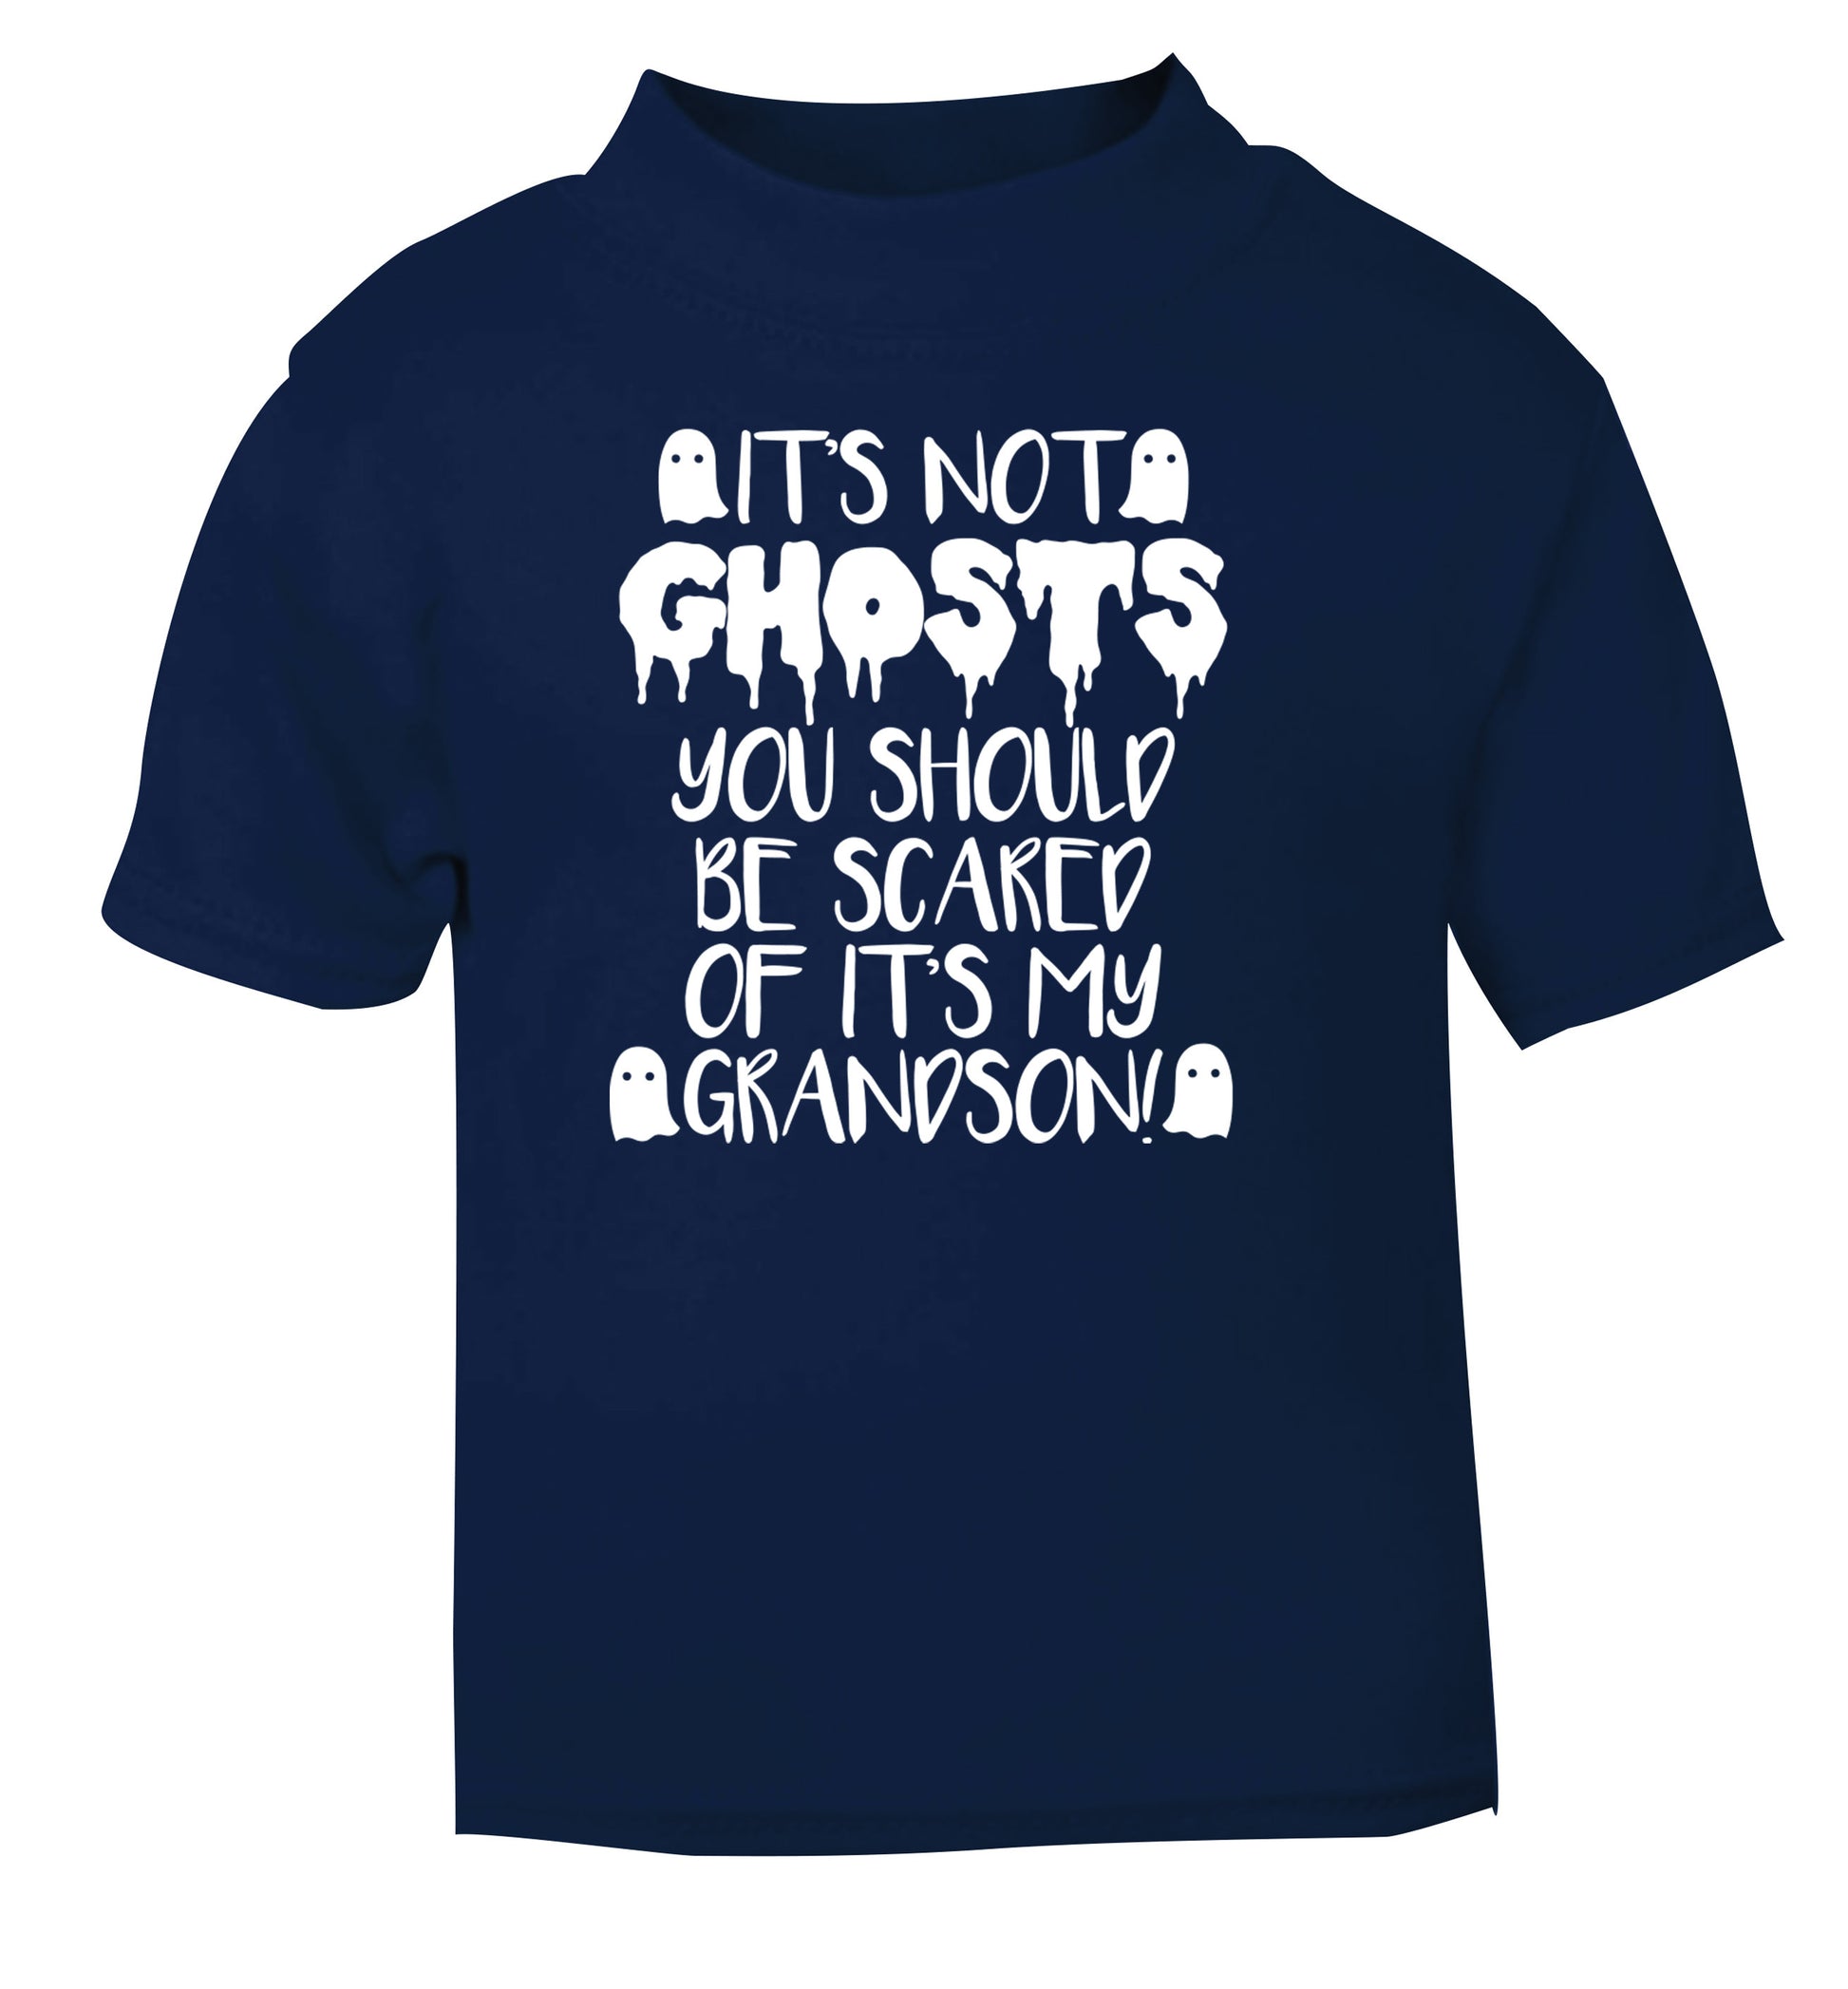 It's not ghosts you should be scared of it's my grandson! navy Baby Toddler Tshirt 2 Years